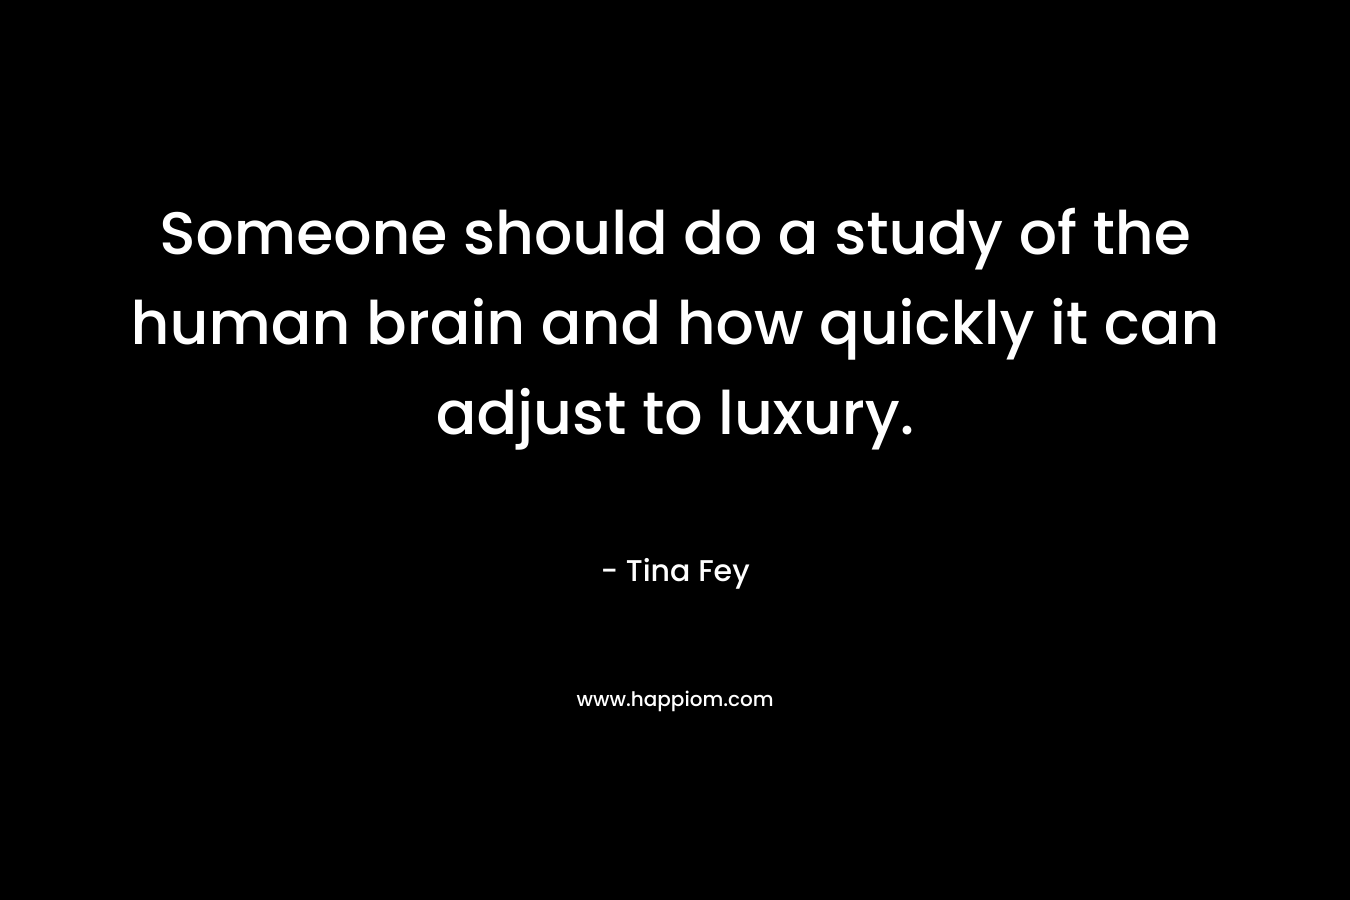 Someone should do a study of the human brain and how quickly it can adjust to luxury. – Tina Fey